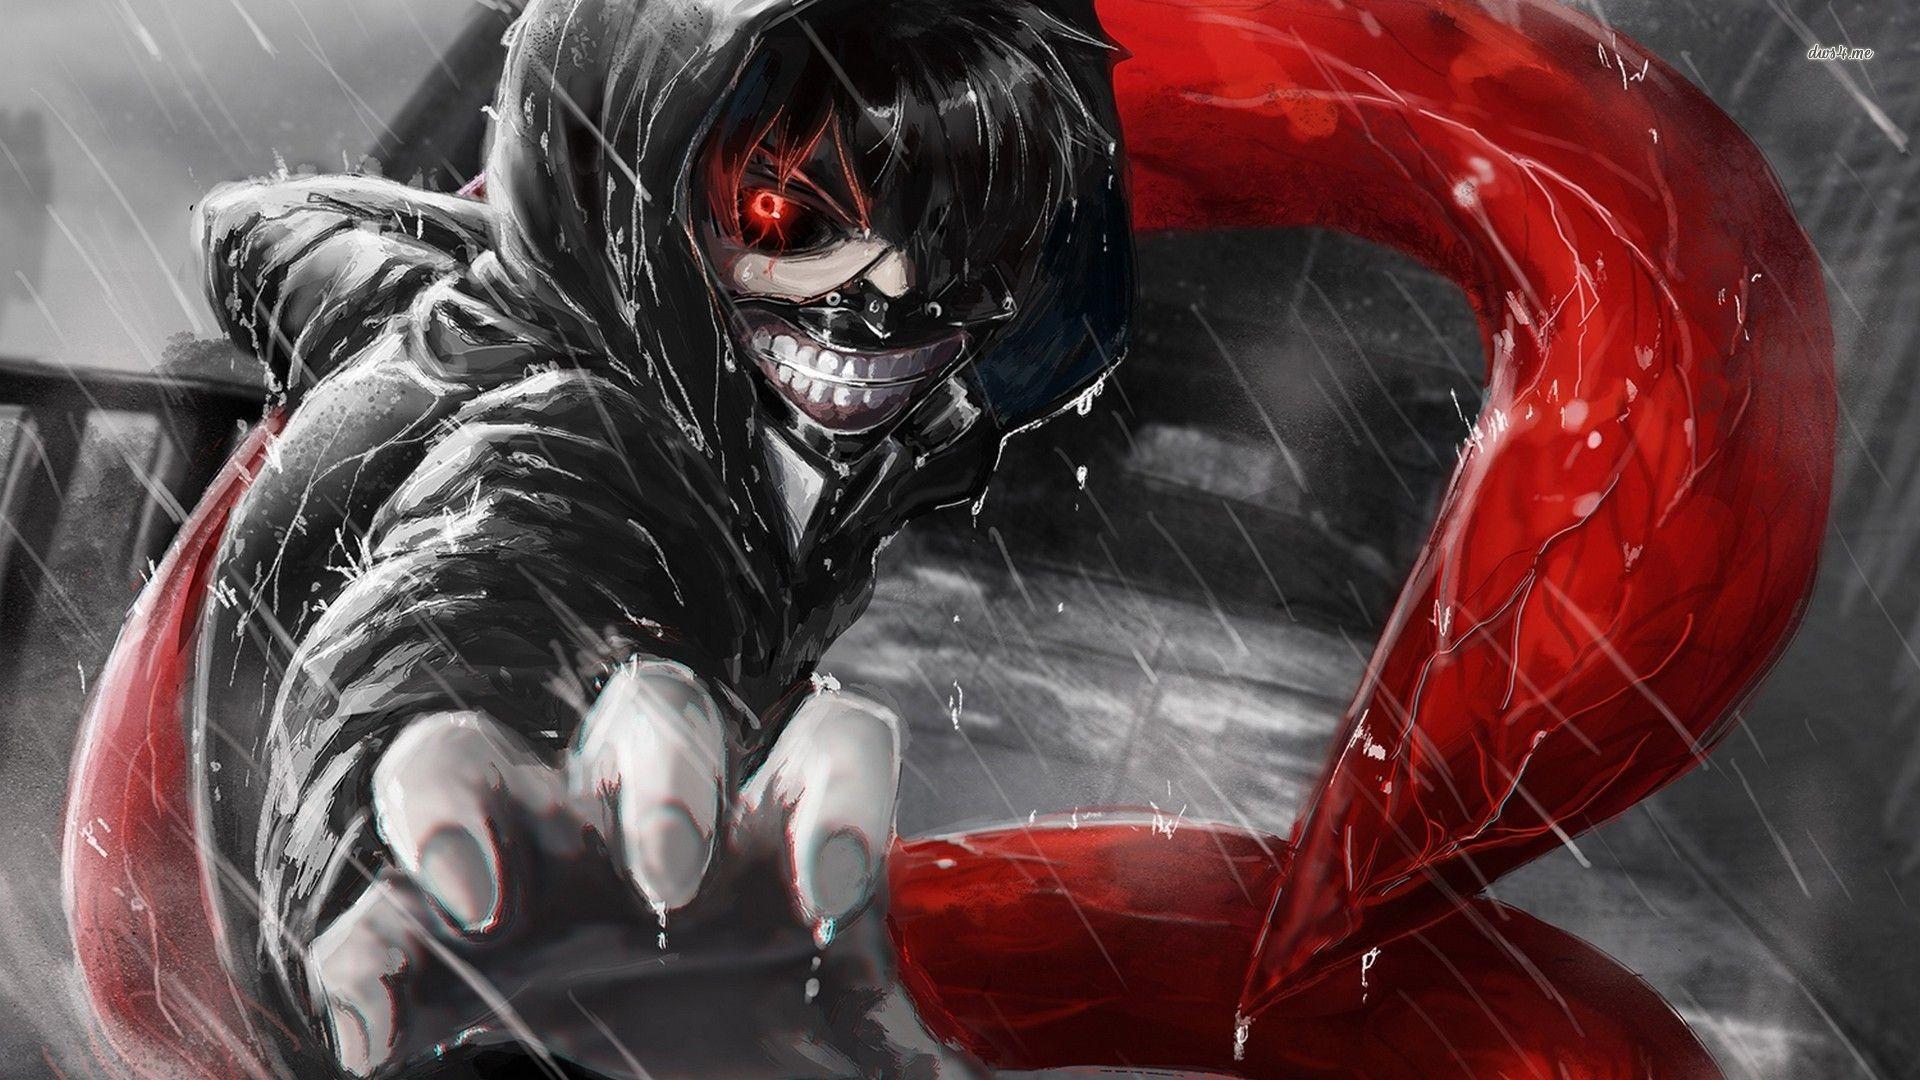 Hd Anime Tokyo Ghoul Wallpapers Wallpaper Cave